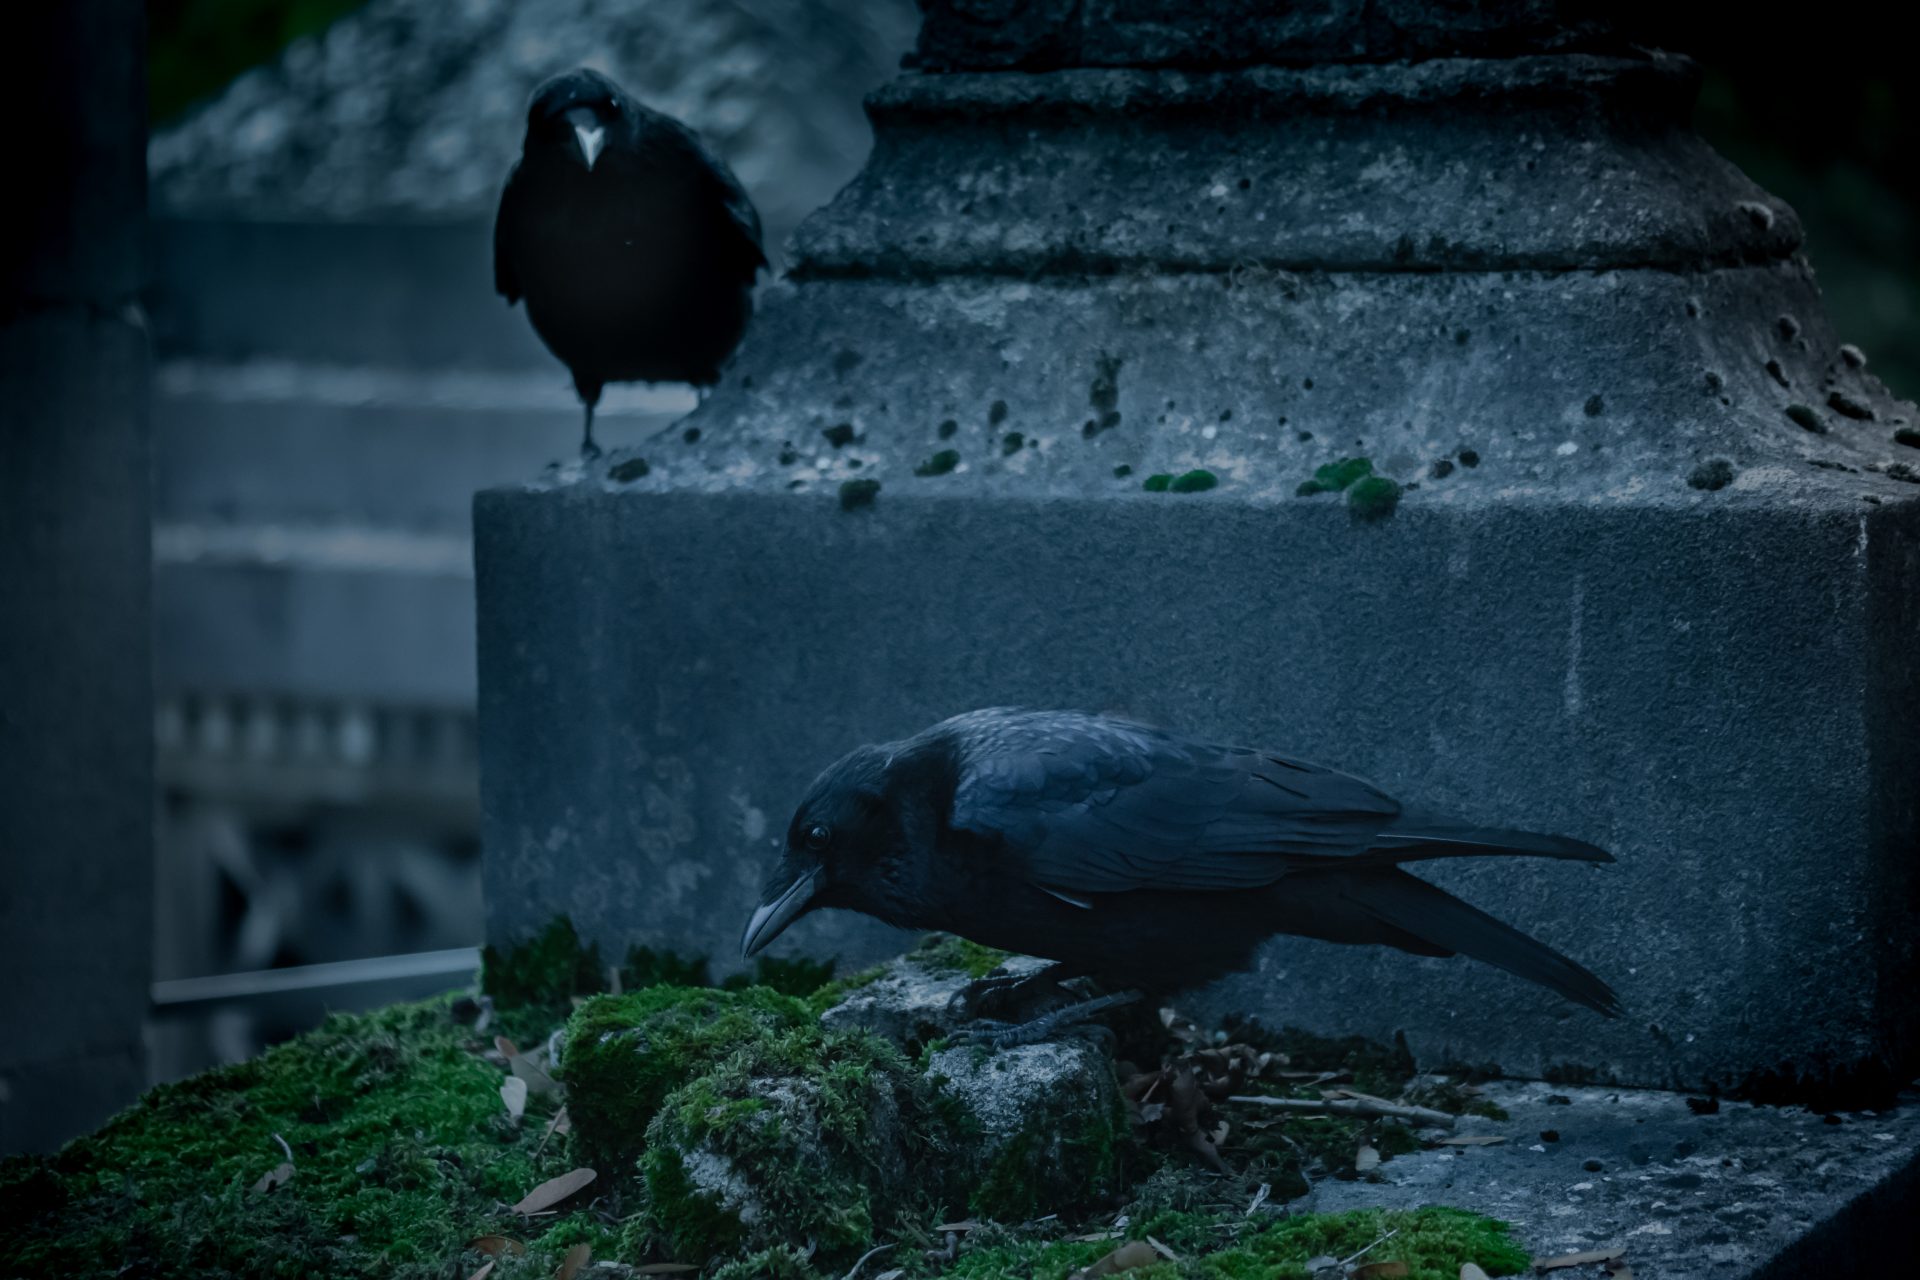 The crows of Japan